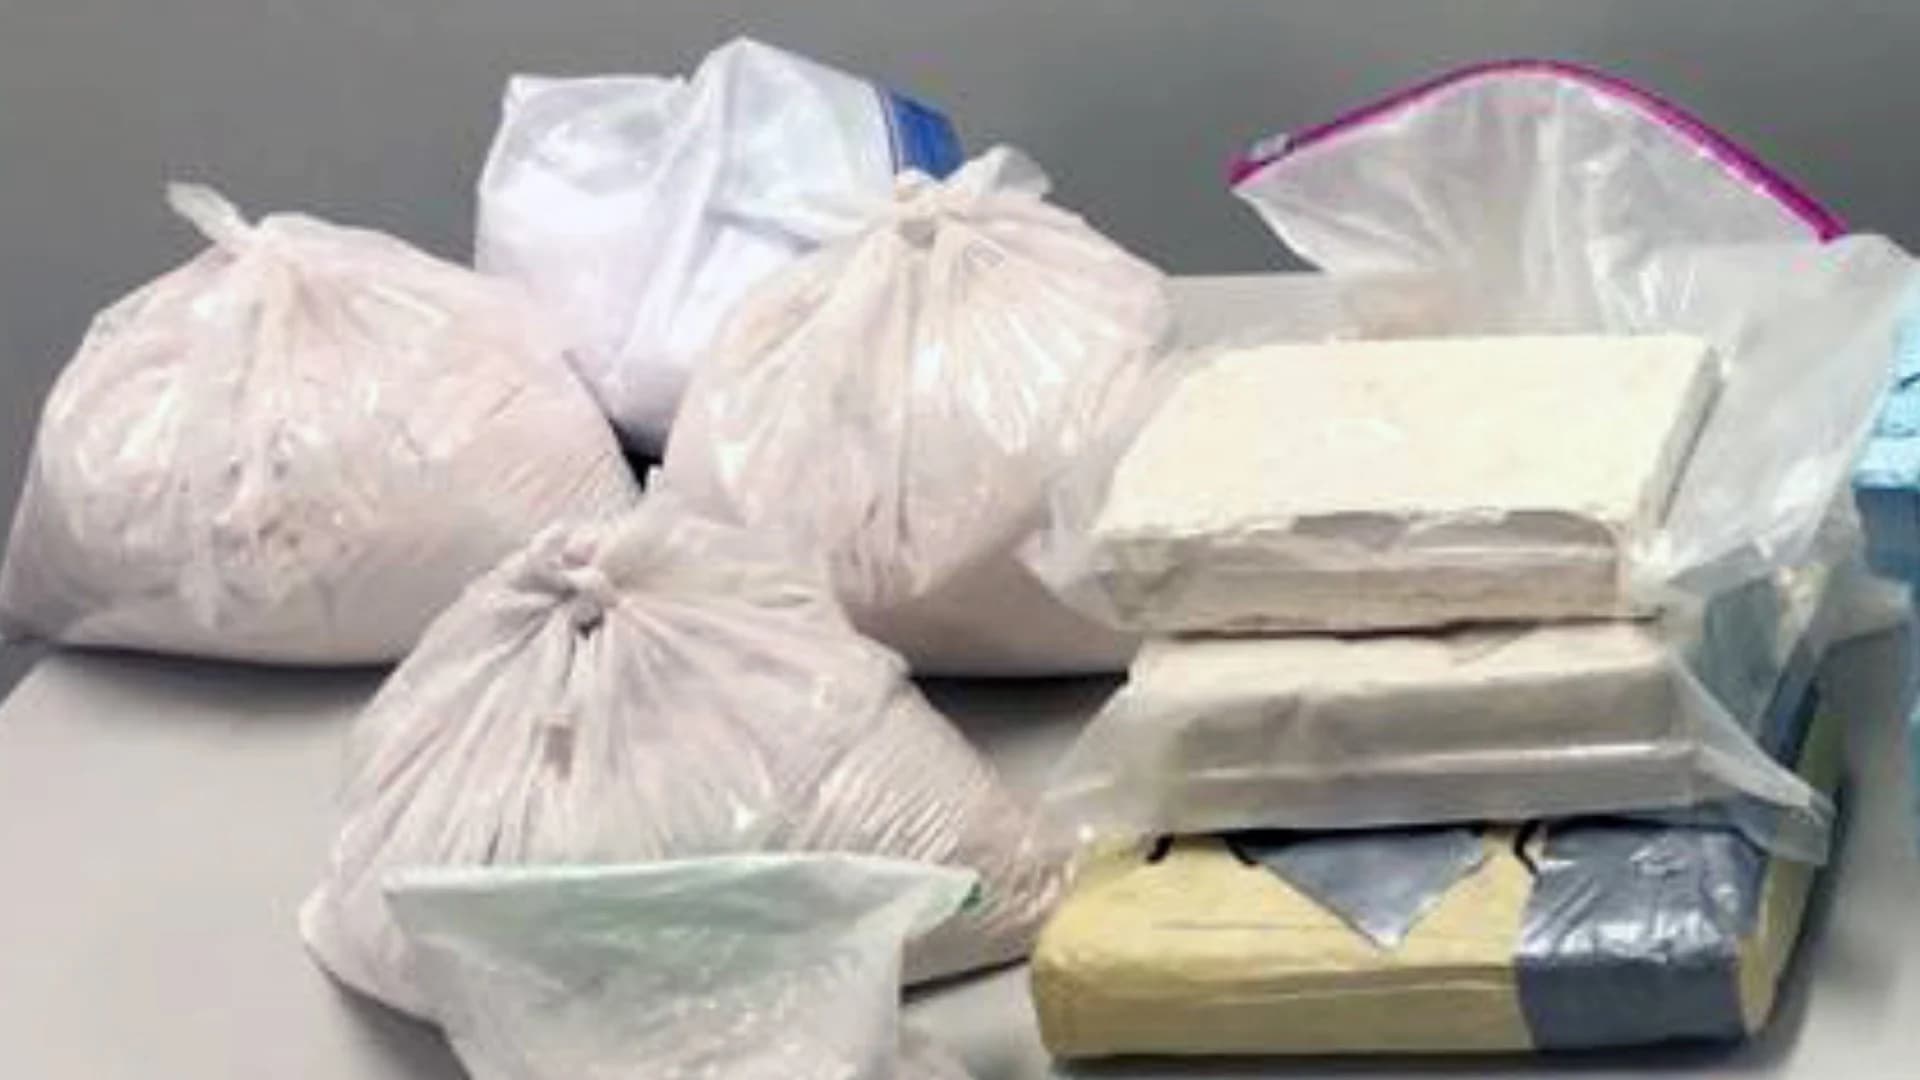 Prosecutors: 5 arrested in $2M drug bust at Bronx apartments